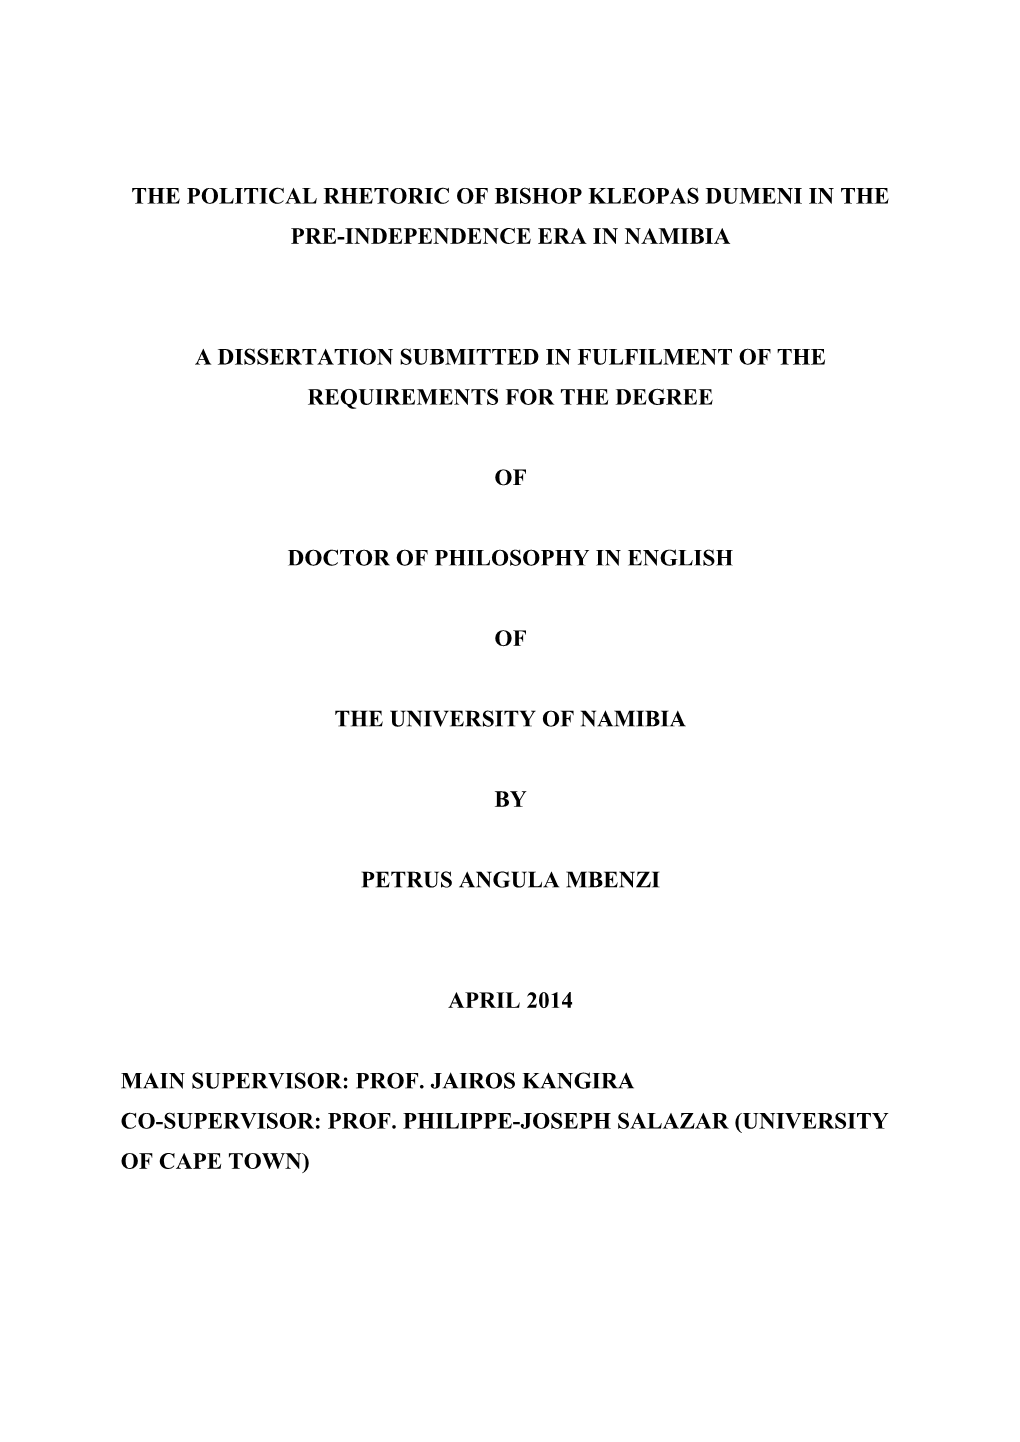 The Political Rhetoric of Bishop Kleopas Dumeni in the Pre-Independence Era in Namibia a Dissertation Submitted in Fulfilment Of